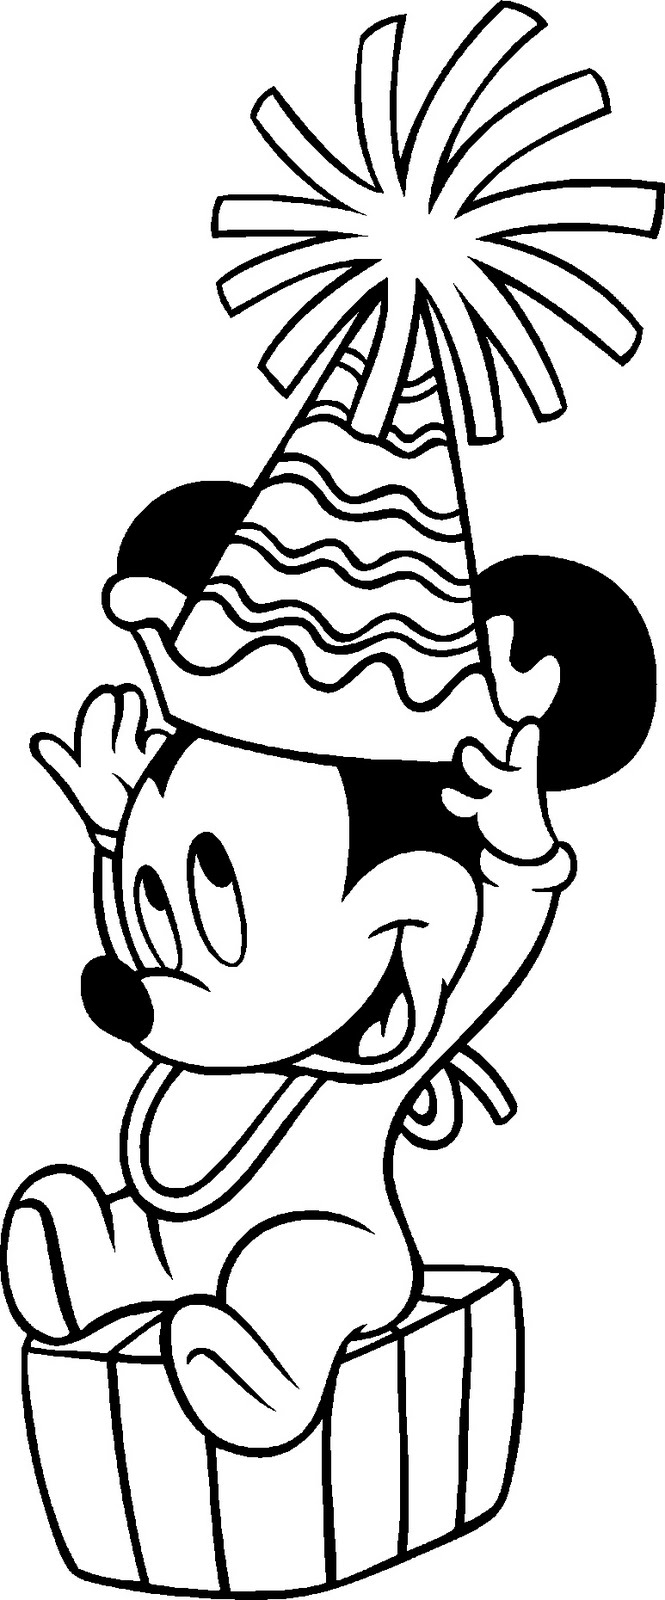 Disney Coloring Pages "Baby Mickey Mouse Character Birthday" >> Disney